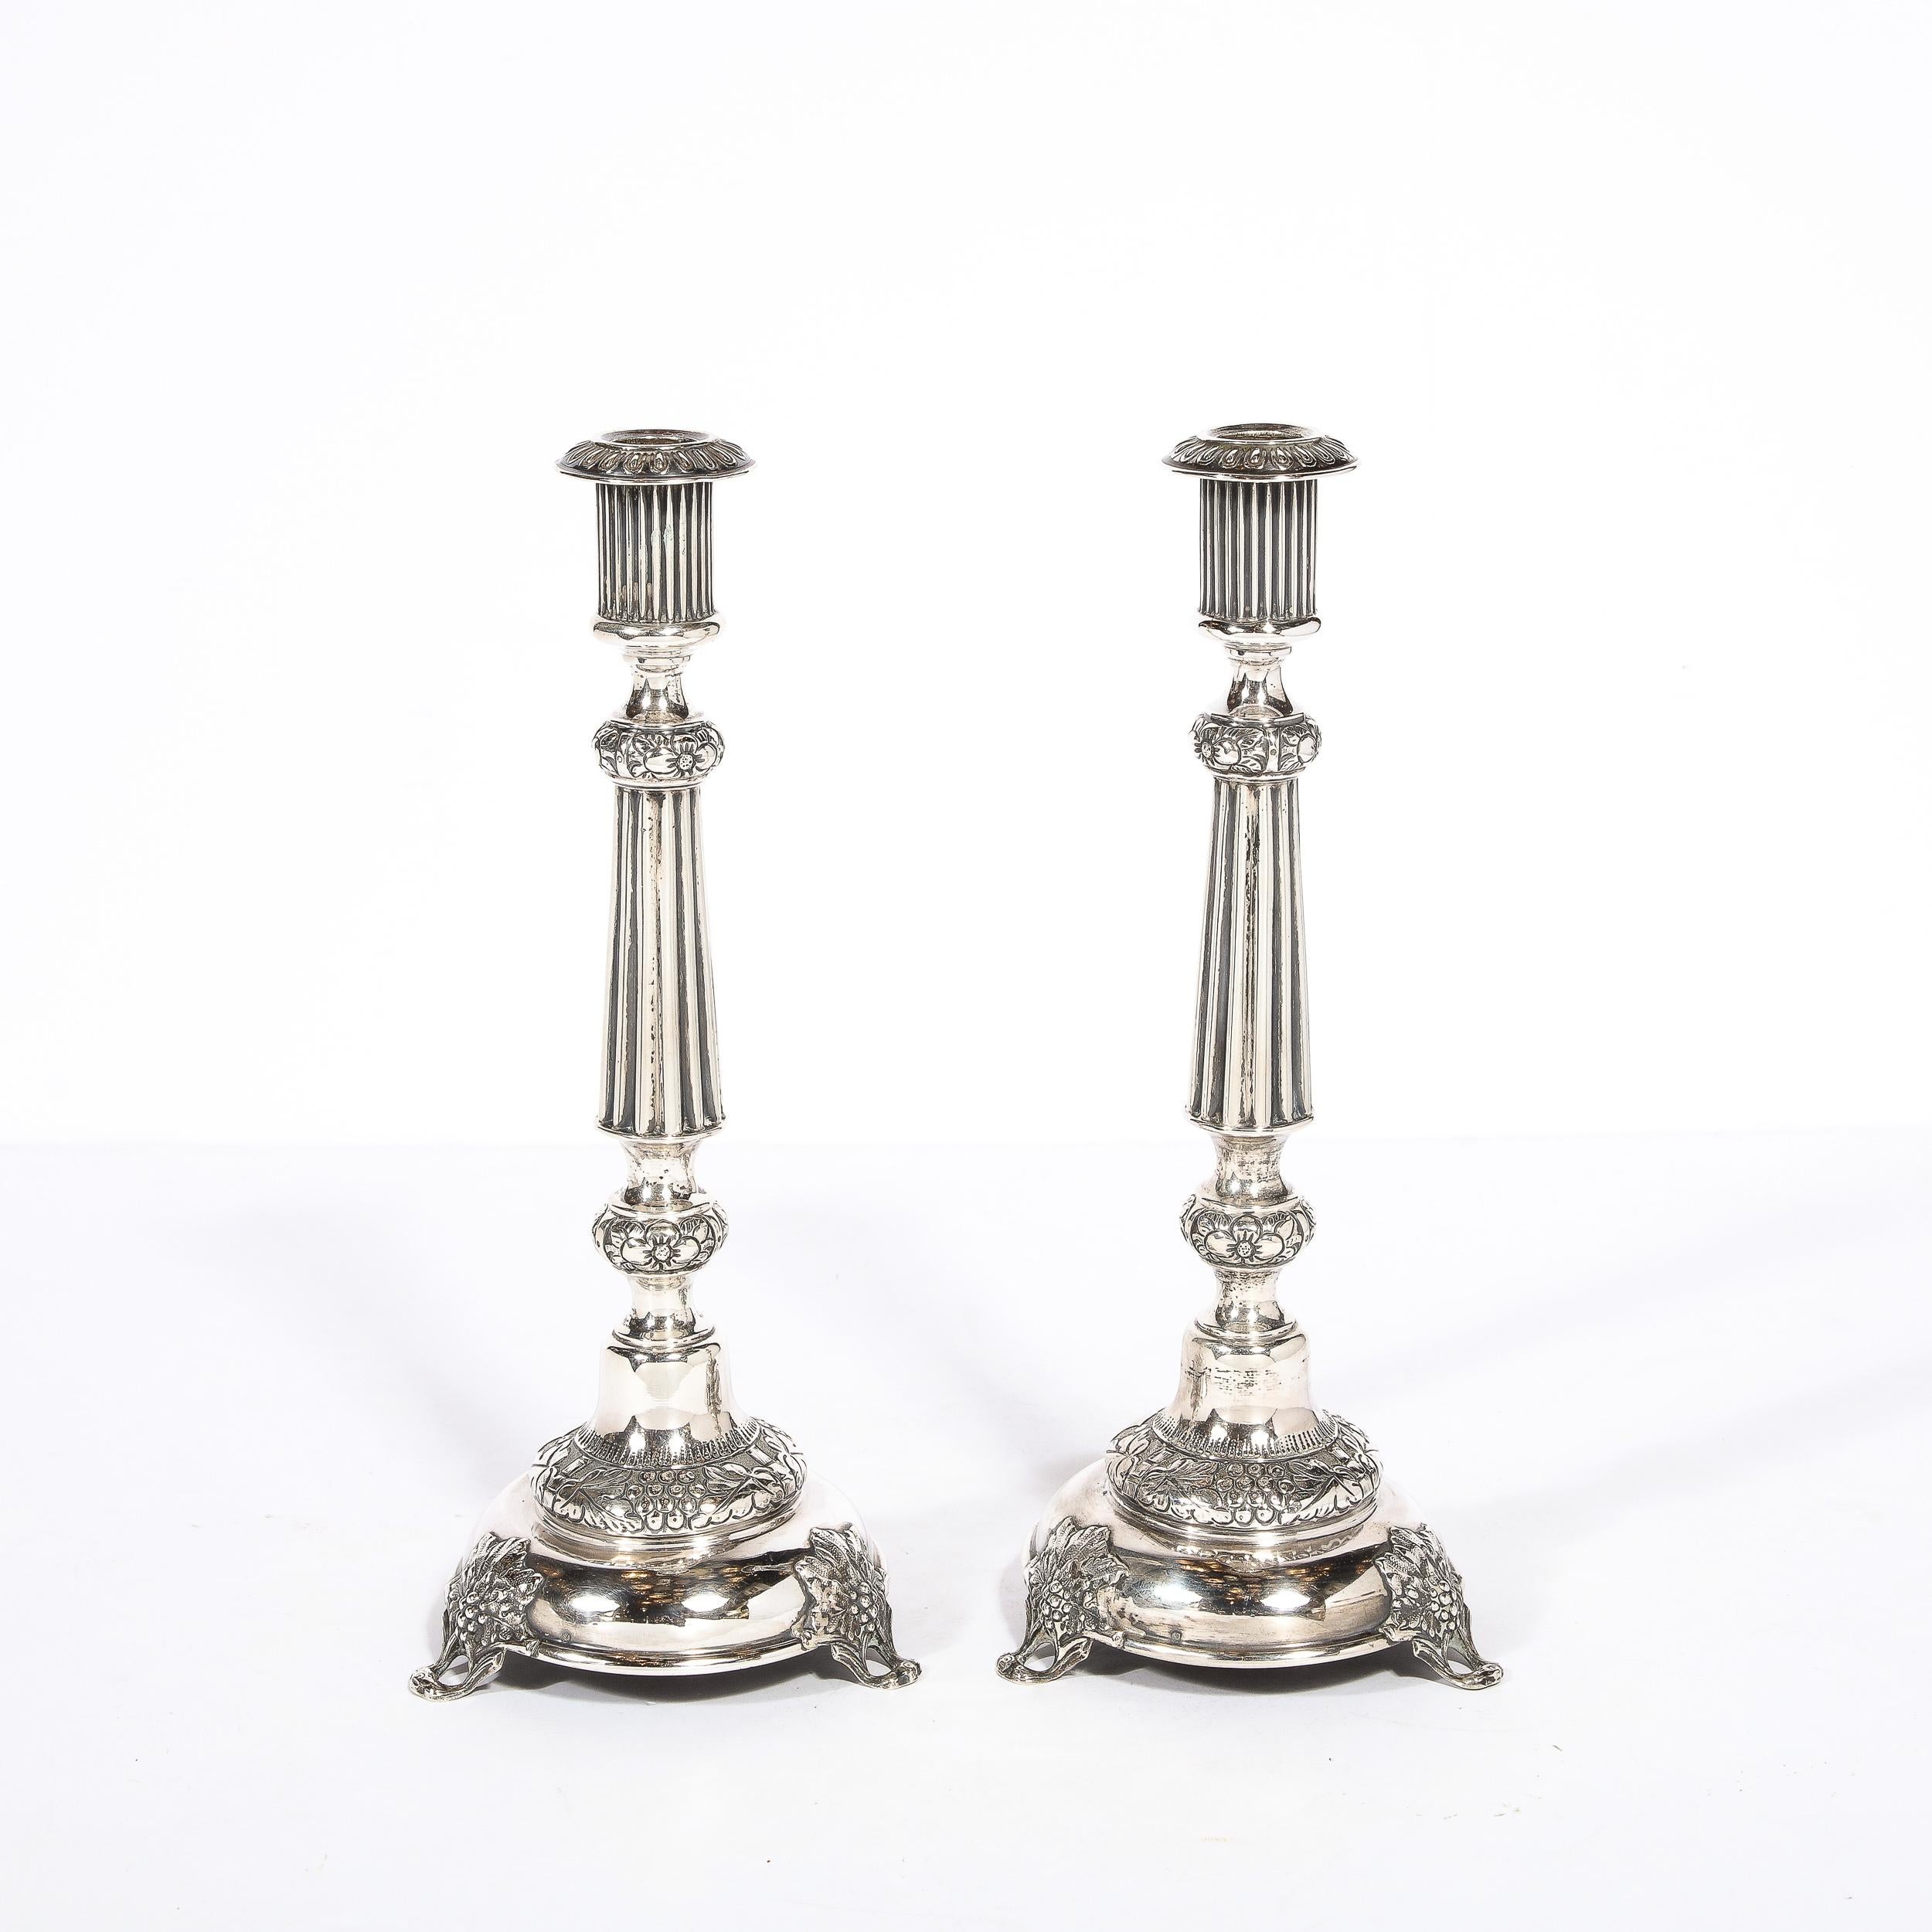 Russian Pair of Antique Sterling Silver Sabbath Candle Holders Signed J. Ehrlich